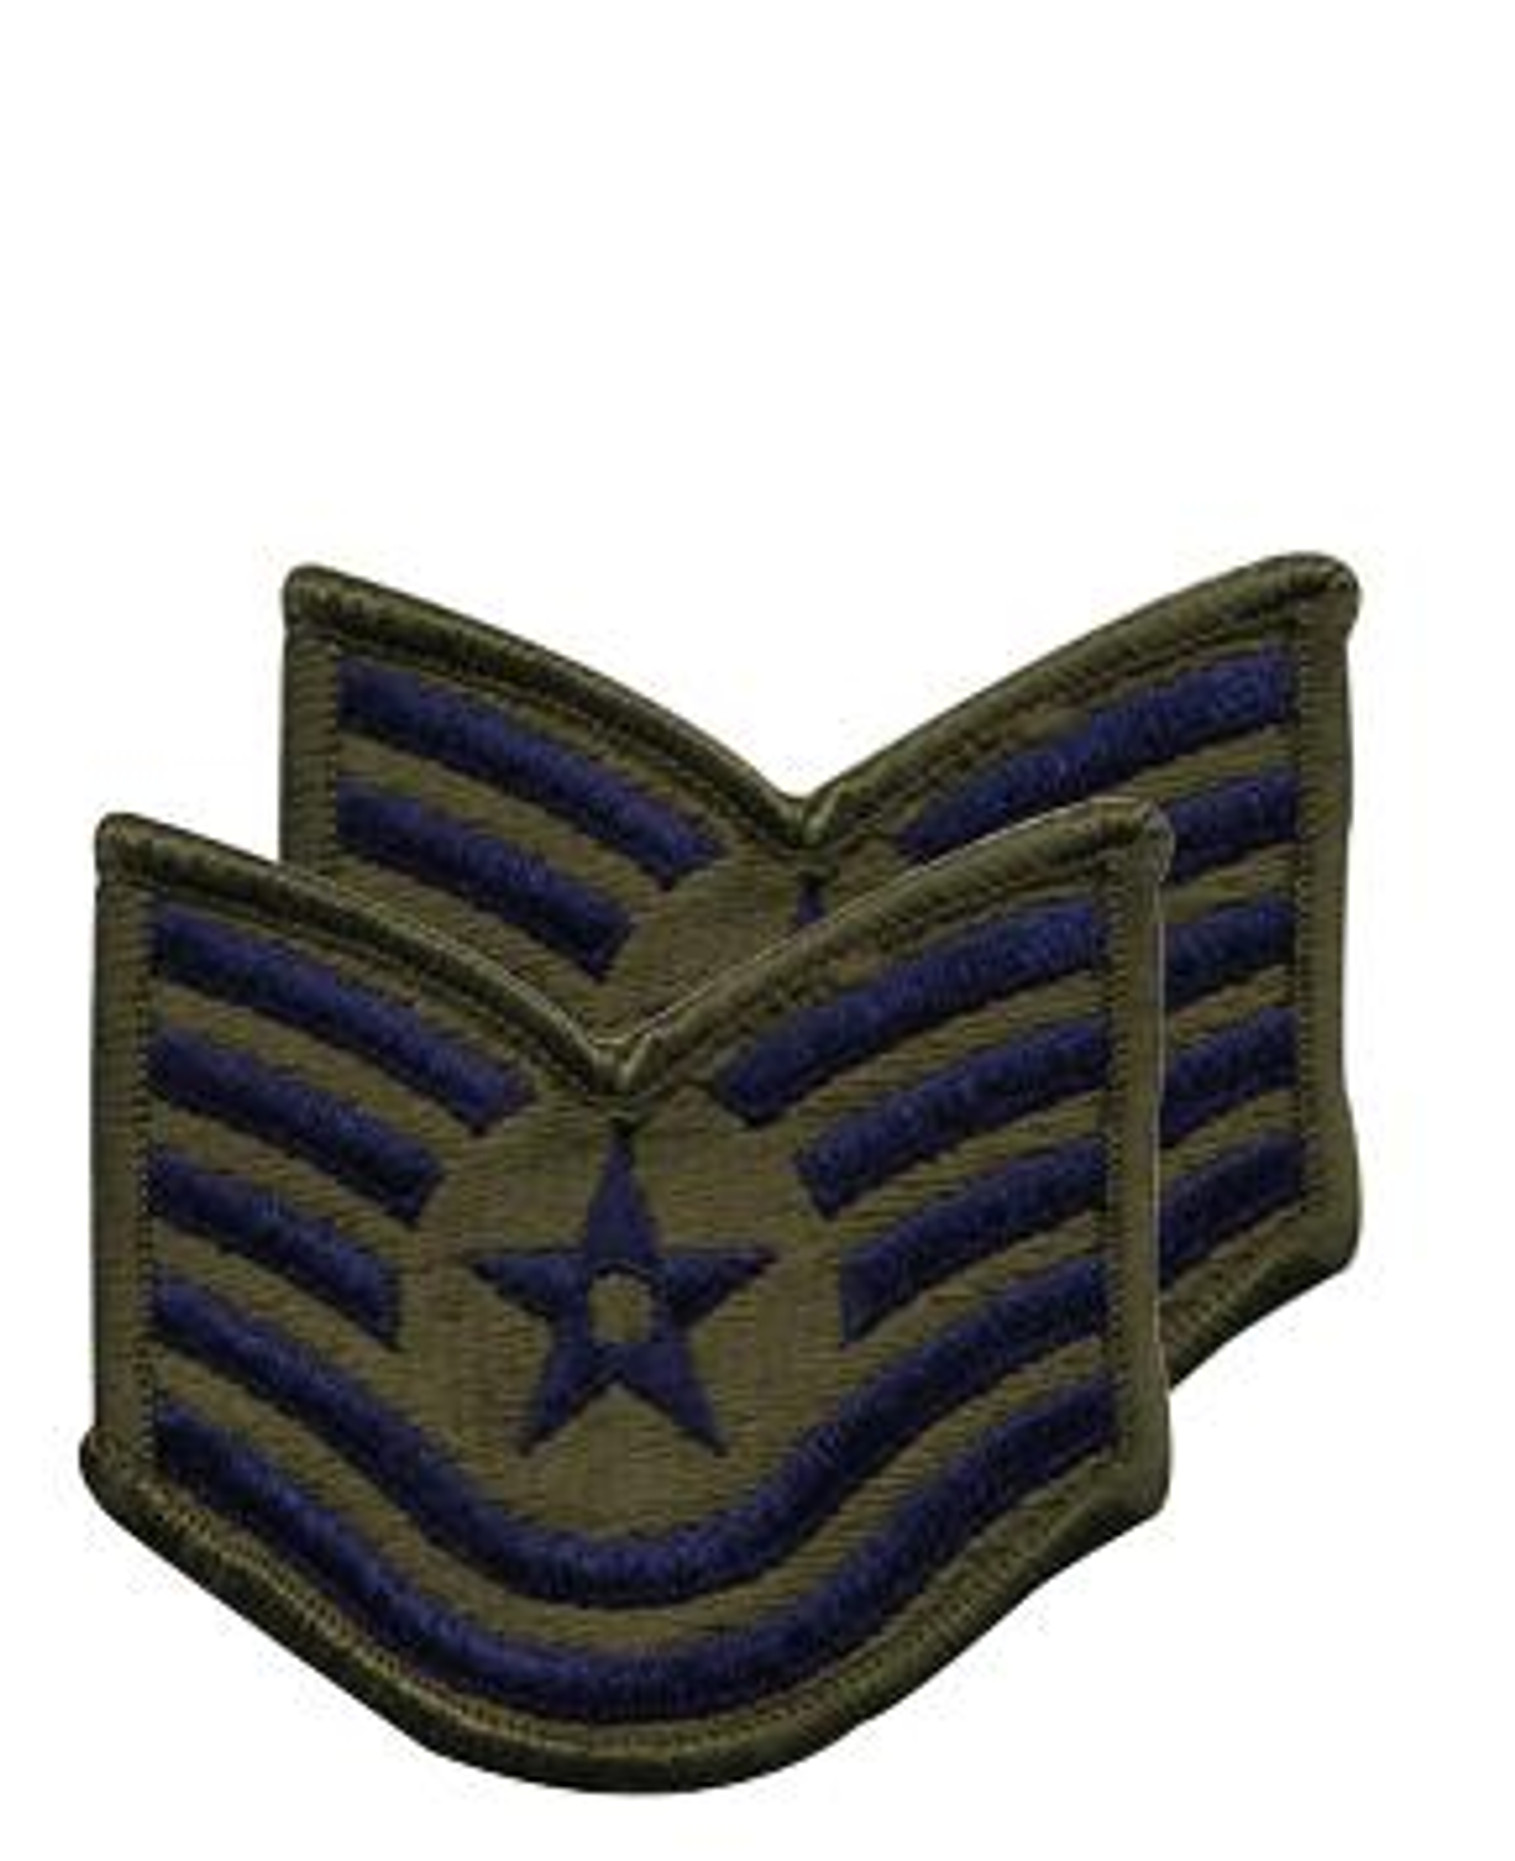 Patch - Subdued Air Force Technical Sergeant